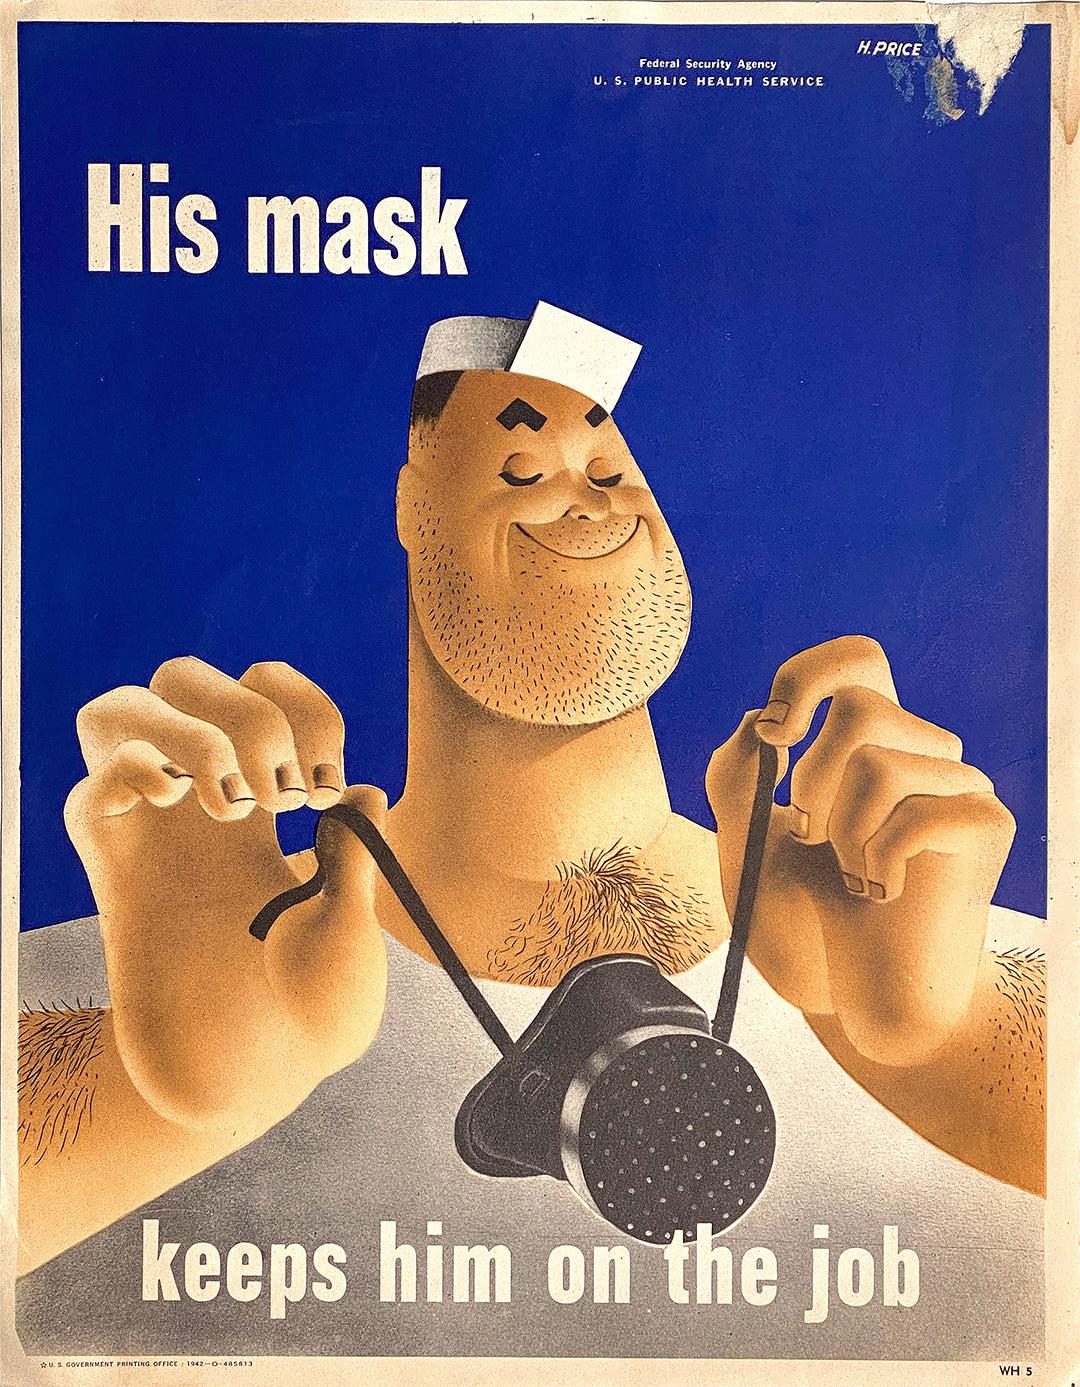 Original Vintage WWII Poster His Mask Keeps Him on the Job by Price